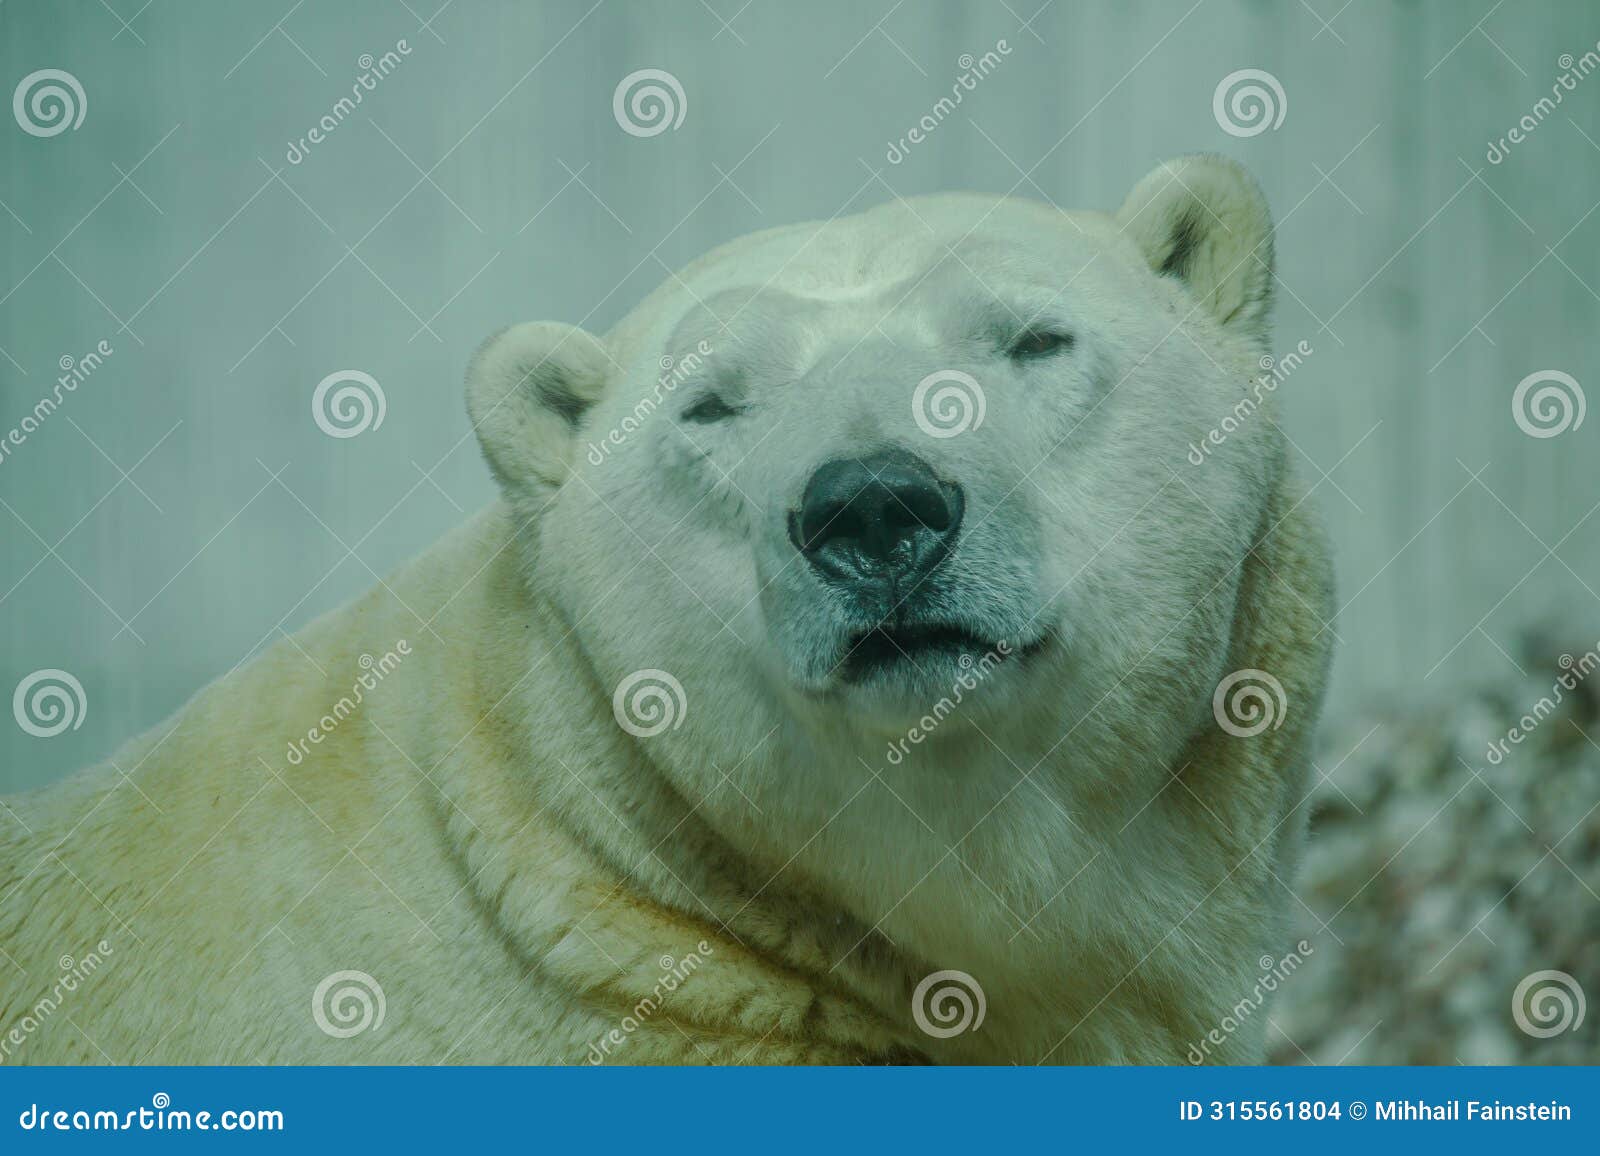 the polar bear is the largest land carnivore